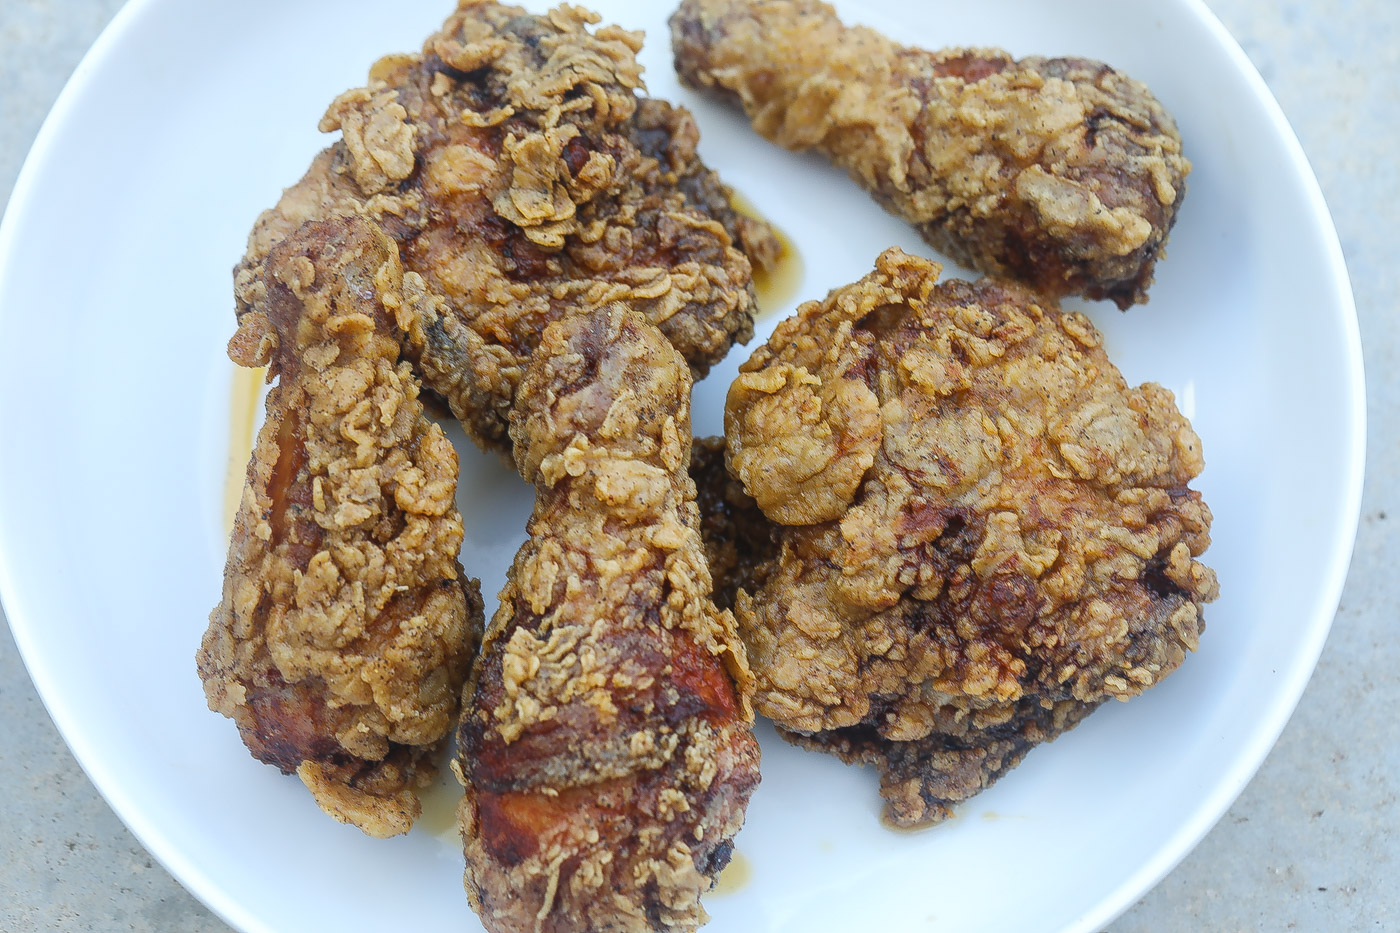 Southern fried chicken pieces on a white plate